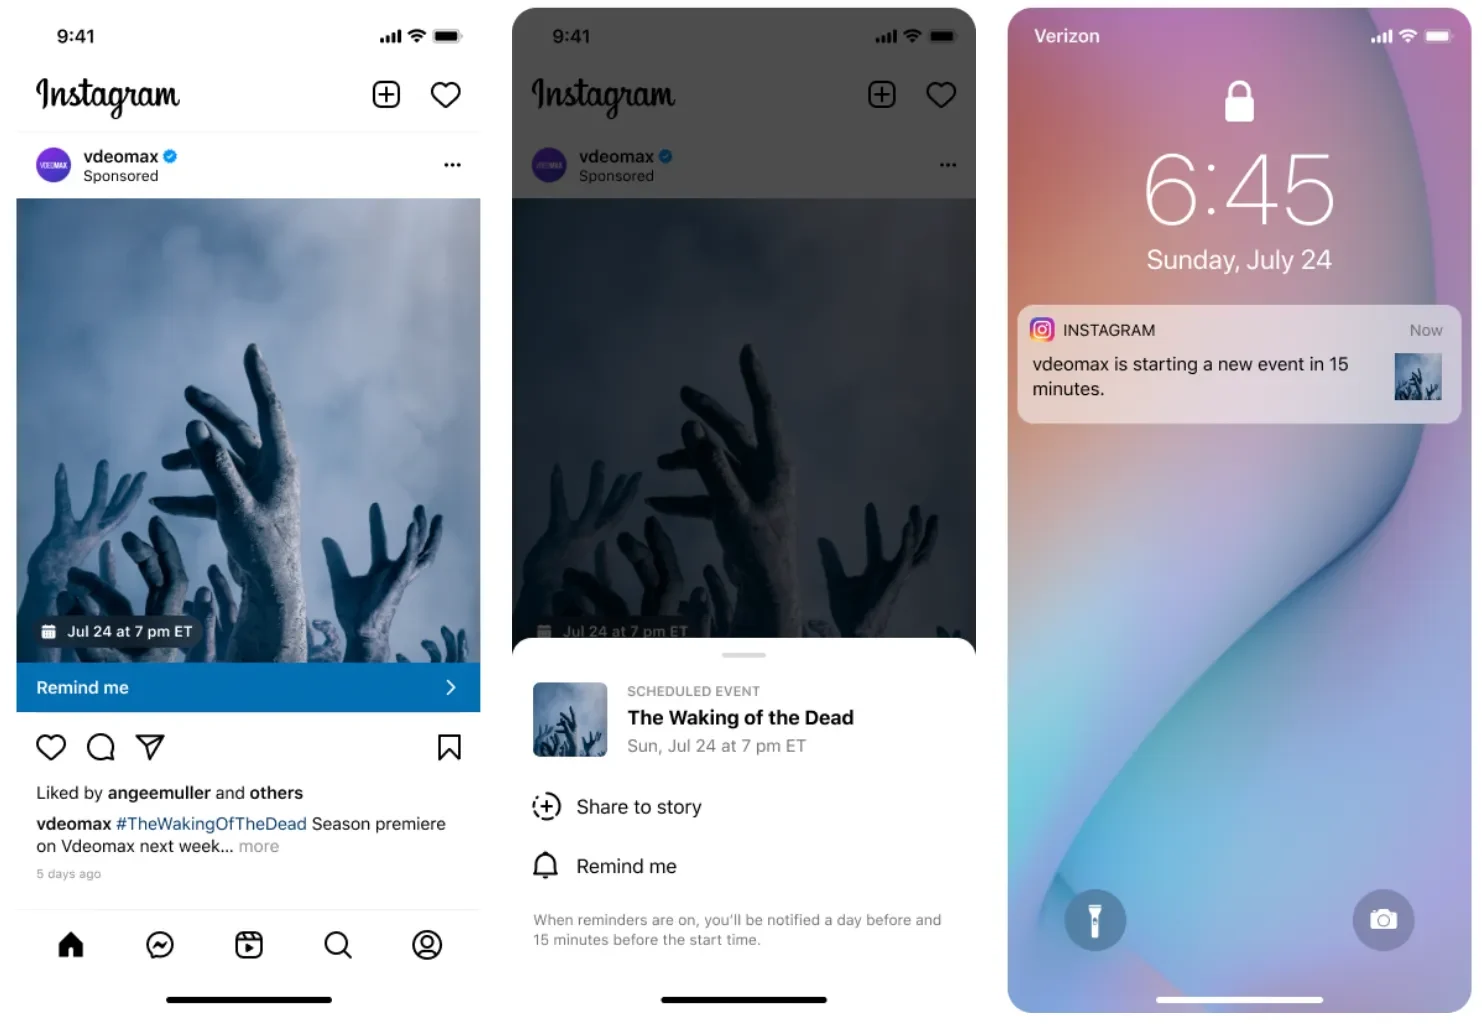 Screenshots showing how Instagram reminder ads will look like.